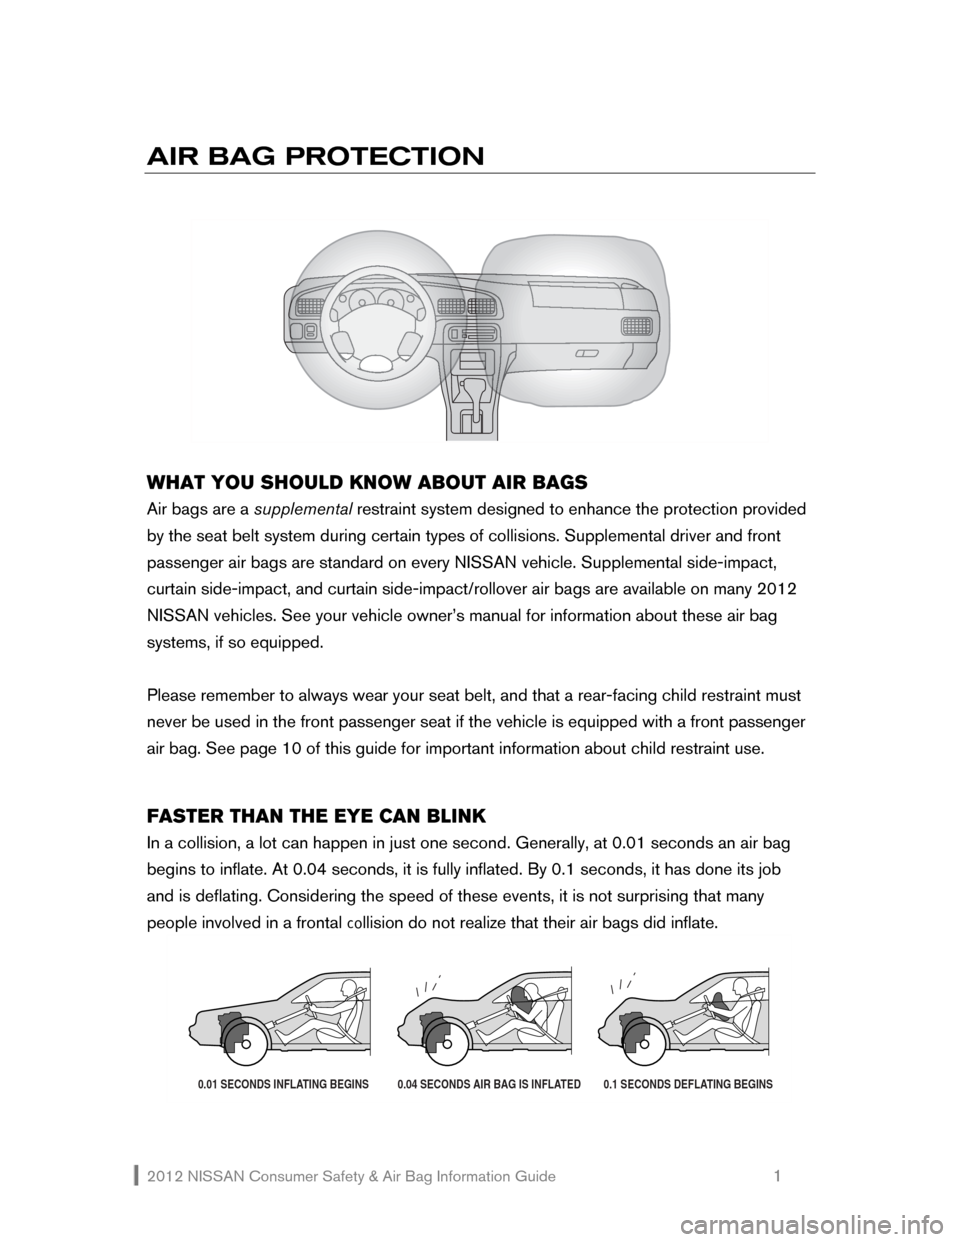 NISSAN PATHFINDER 2012 R52 / 4.G Consumer Safety Air Bag Information Guide 2012 NISSAN Consumer Safety & Air Bag Information Guide                                                   1 
AIR BAG PROTECTION 
    
 
 
WHAT YOU SHOULD KNOW ABOUT AIR BAGS 
Air bags are a supplement